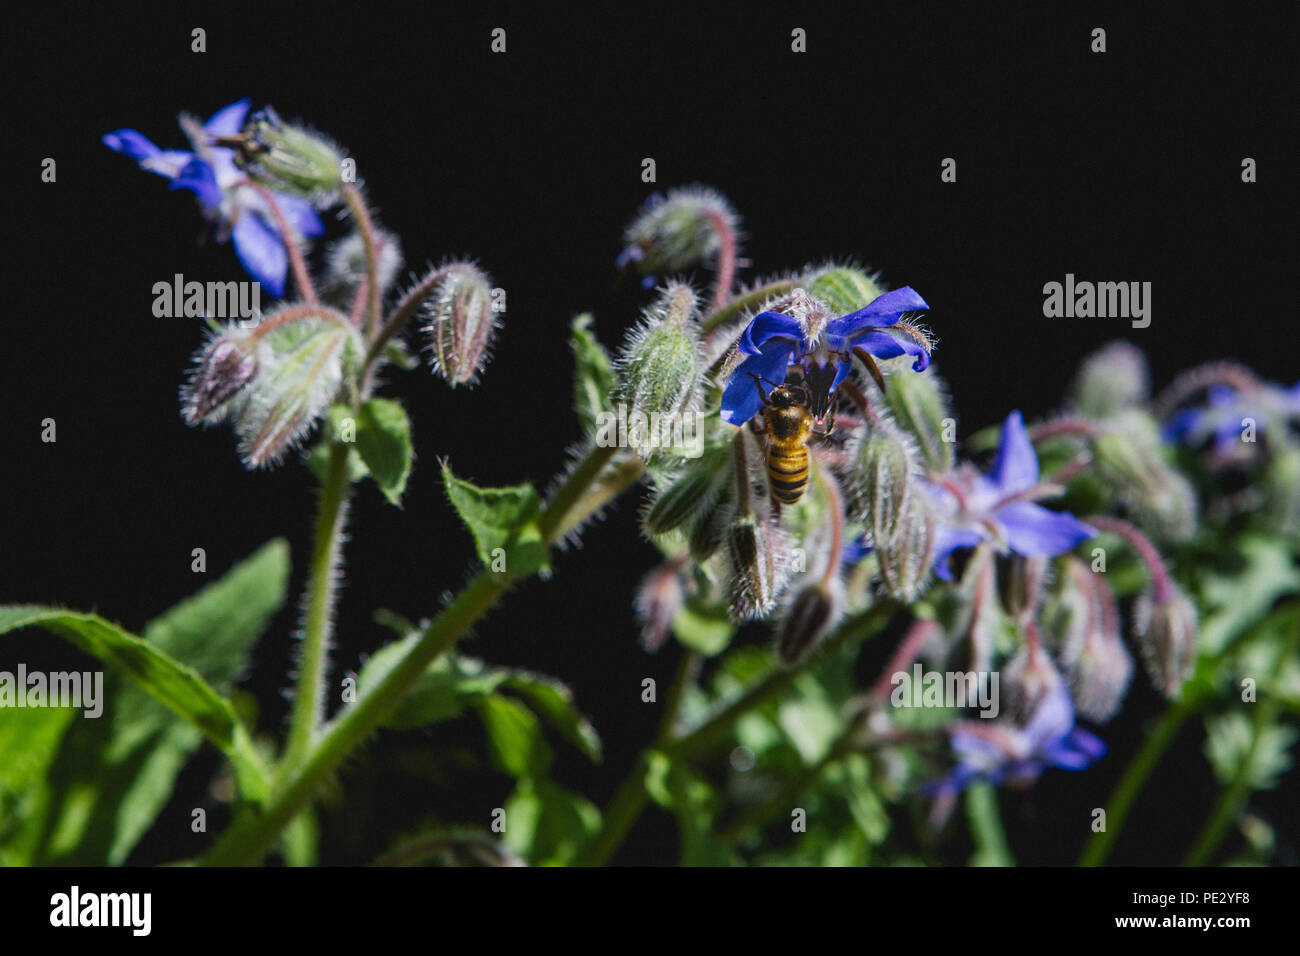 A bee collecting pollen from Borage flowers (starflower). Borage is a wild flower and edible herb with bright blue stars-shaped edible flowers. Stock Photo